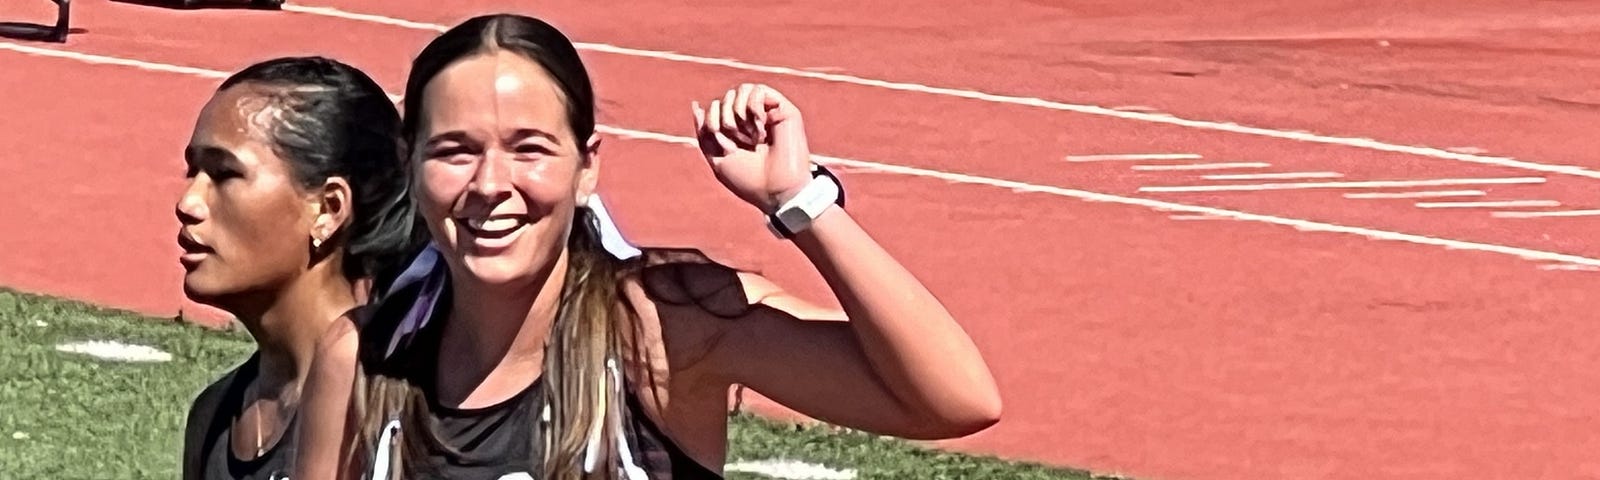 My daughter set a PR in the steeplechase and also won the race.